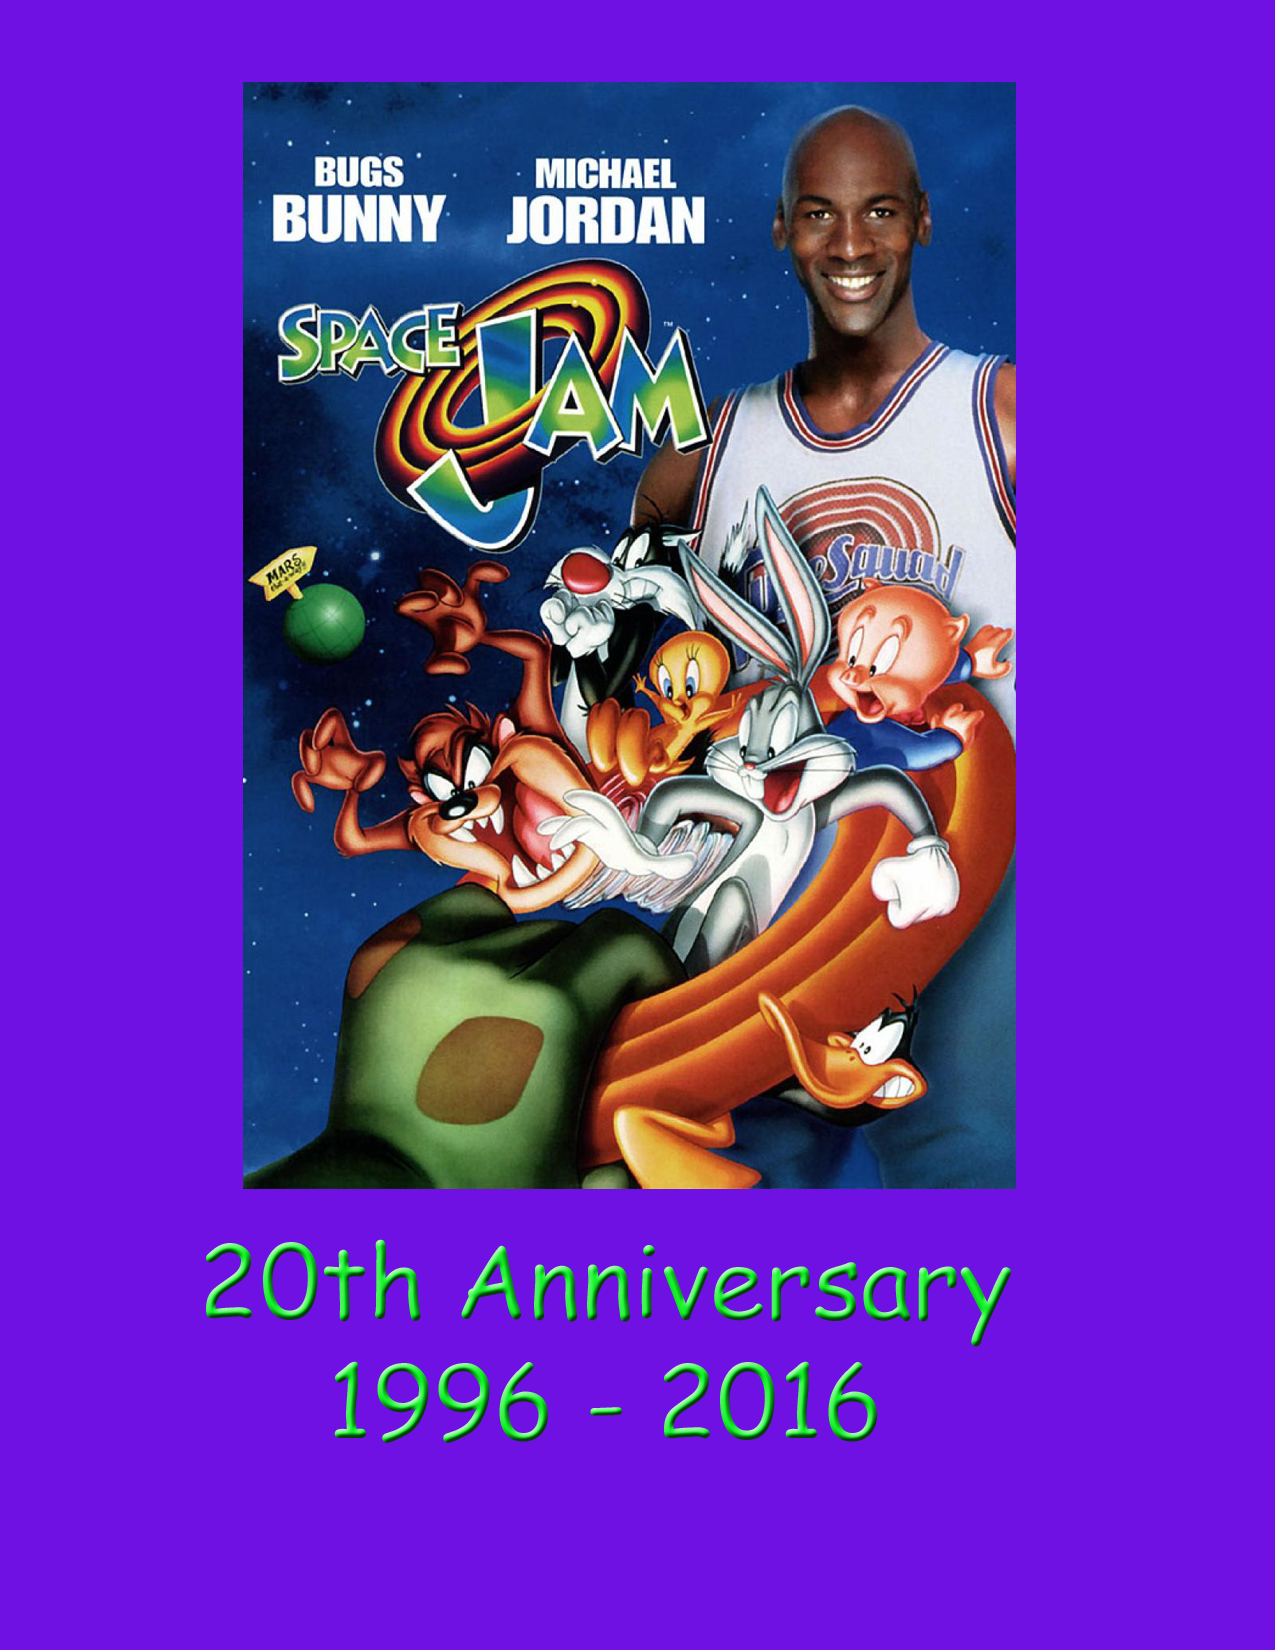 Space Jam Monstars Collage  Space jam, Classic cartoon characters, Happy  20th anniversary